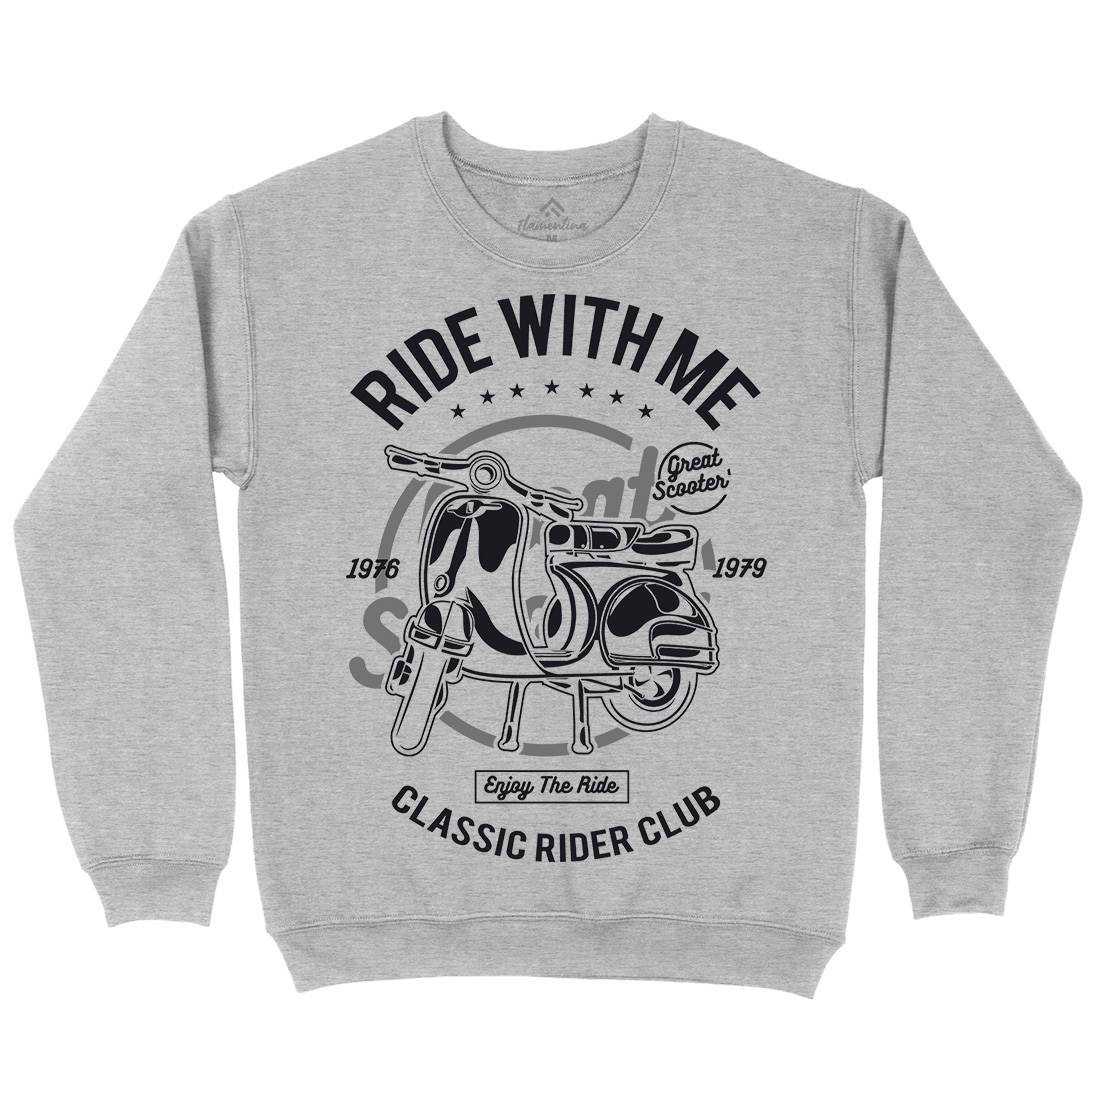 Ride With Me Mens Crew Neck Sweatshirt Motorcycles A120